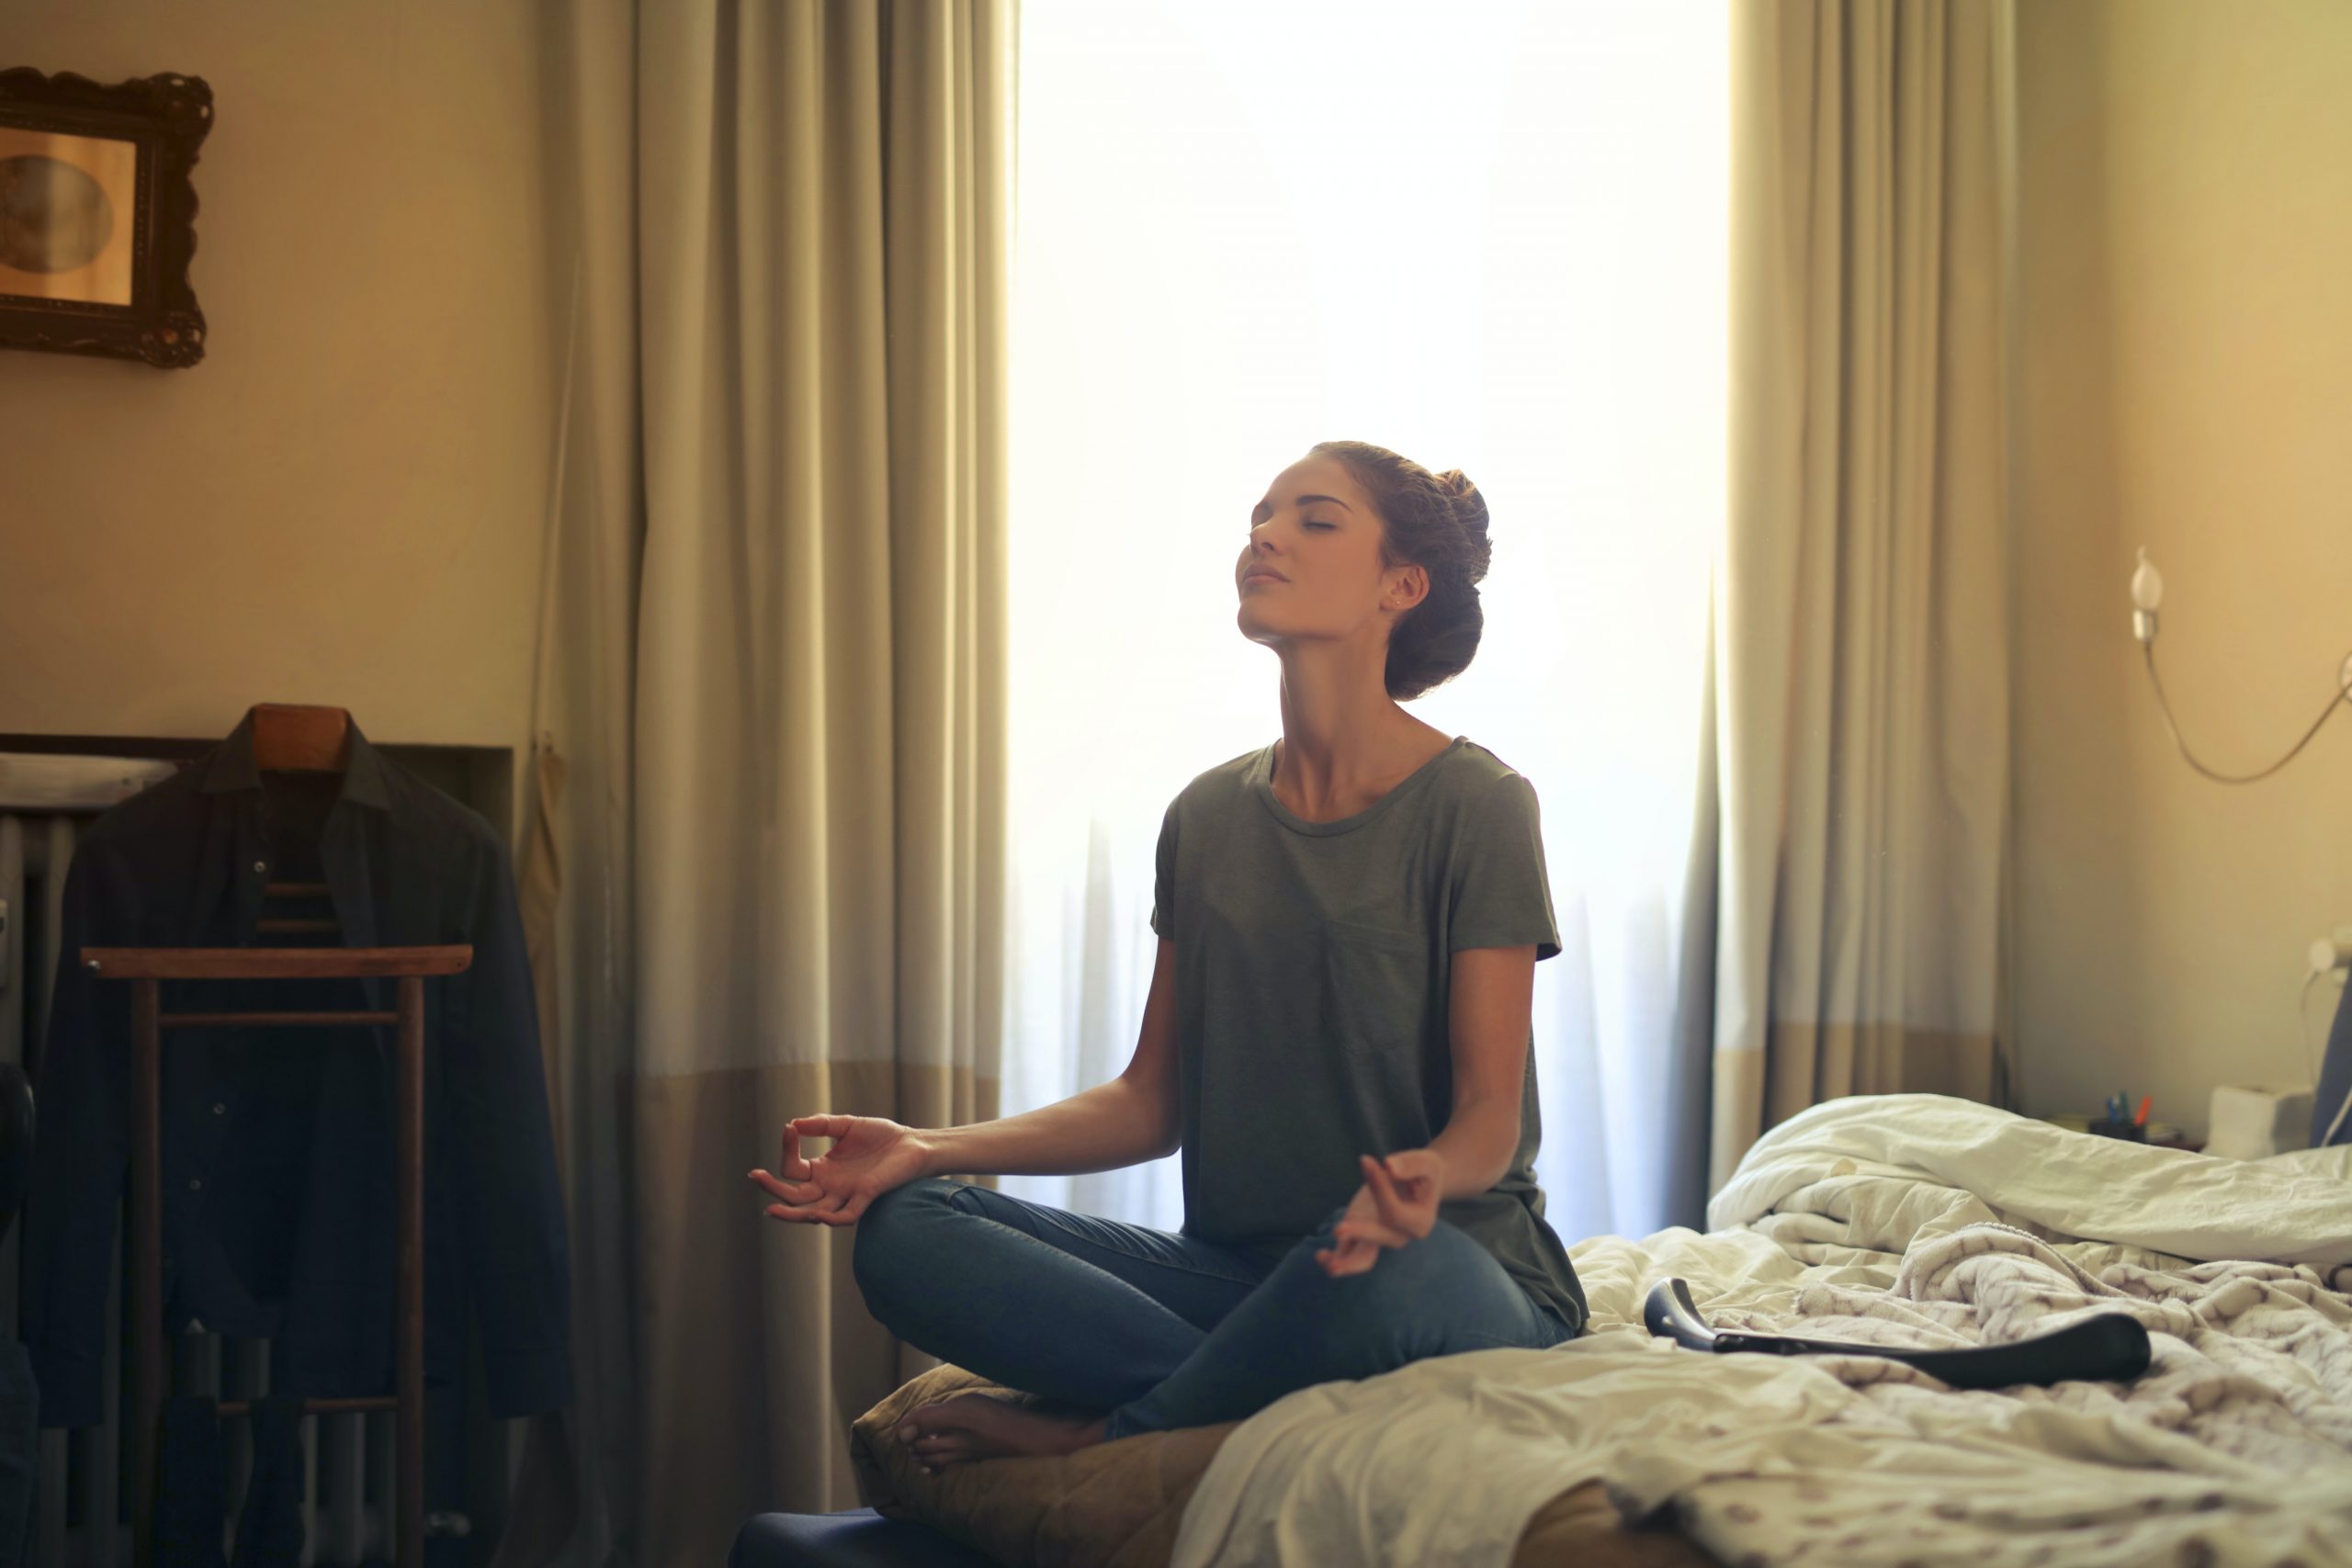 Person sitting on bed meditating